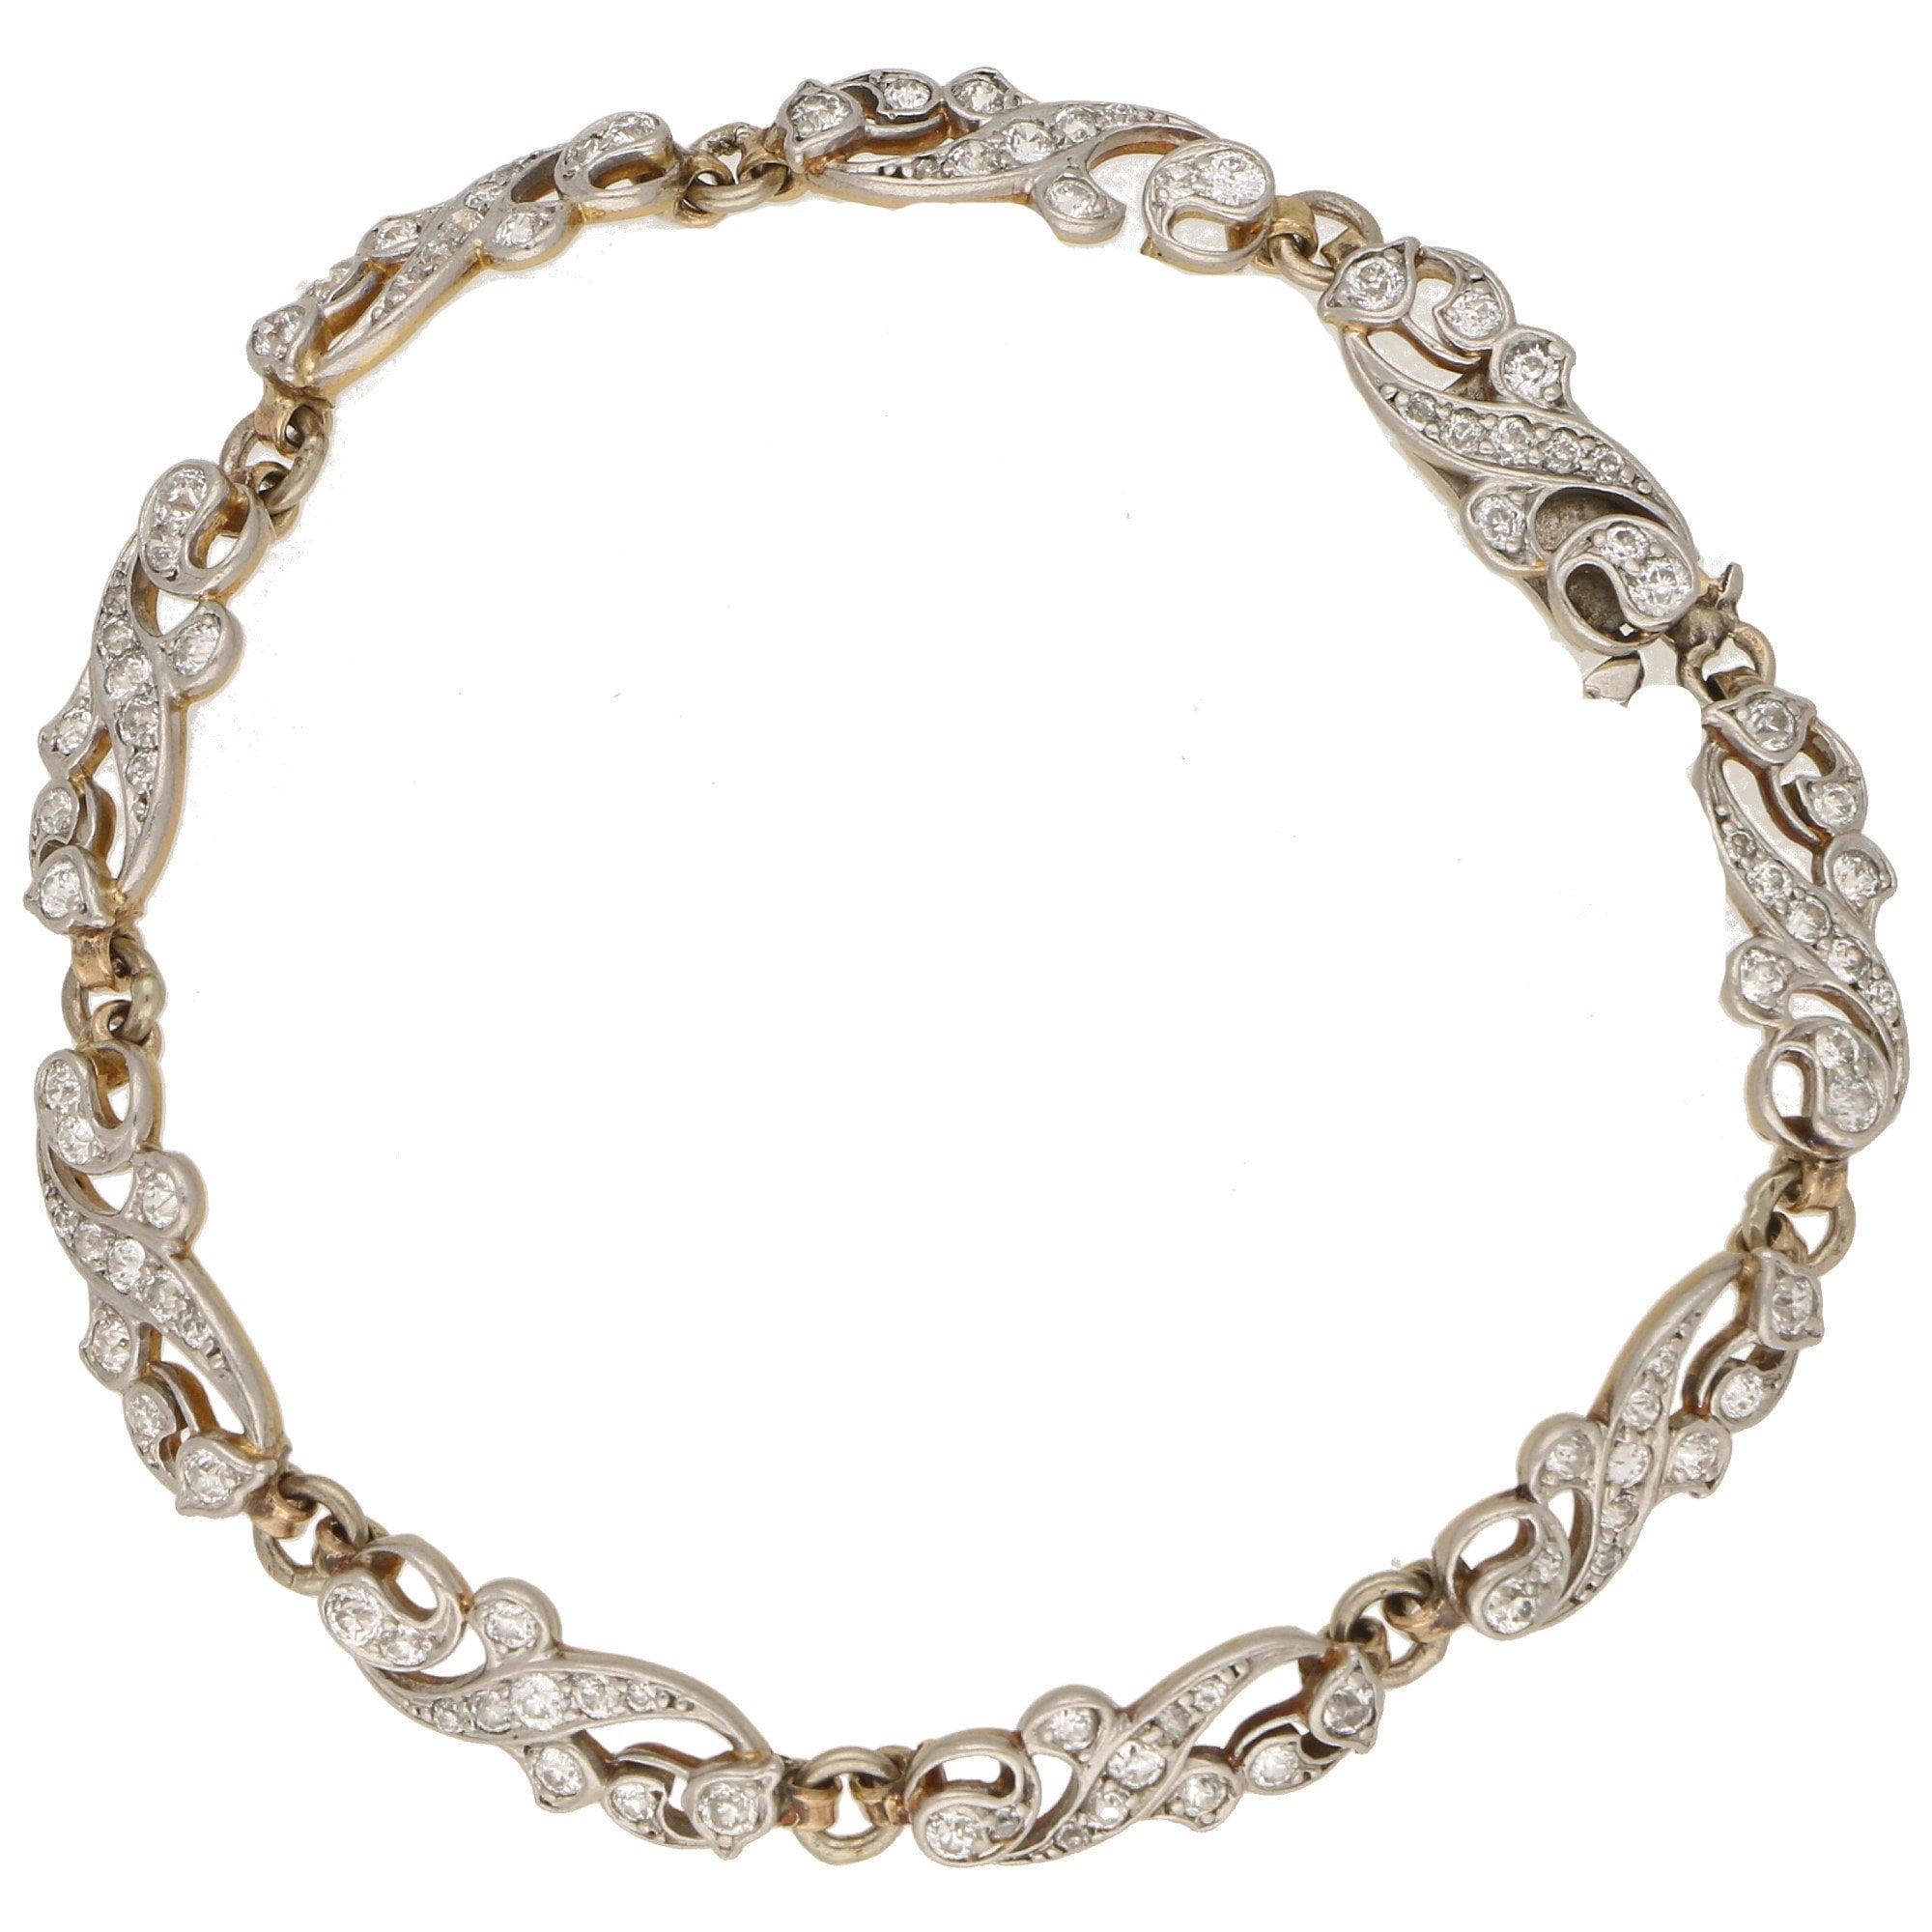 Victorian Scrolled Diamond Bracelet in Silver-on-Gold 2.70cts  For Sale 2